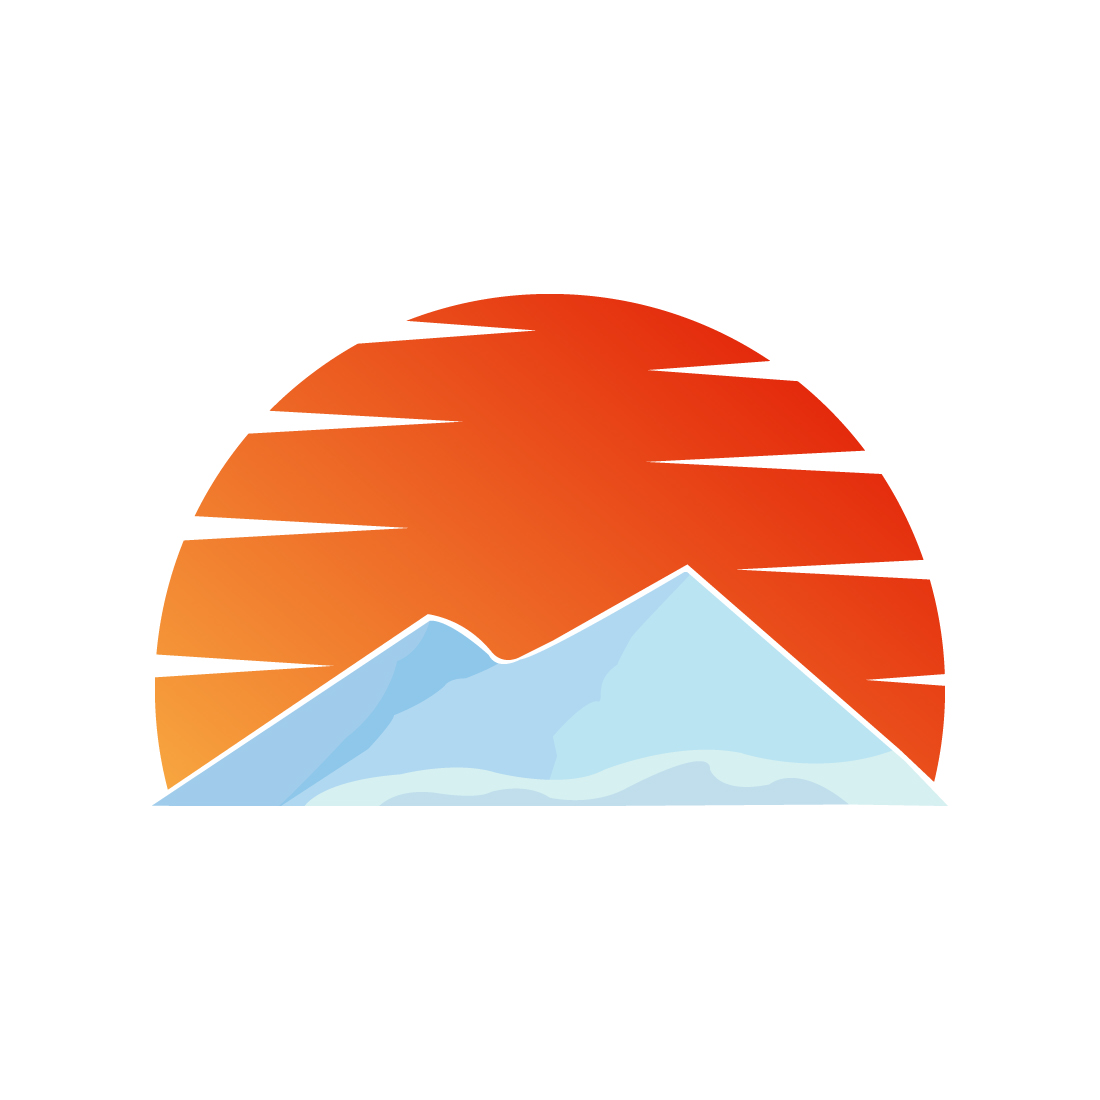 Himalaya logo design vector images Mountain logo design With sun and clouds above it landscapes logo design preview image.